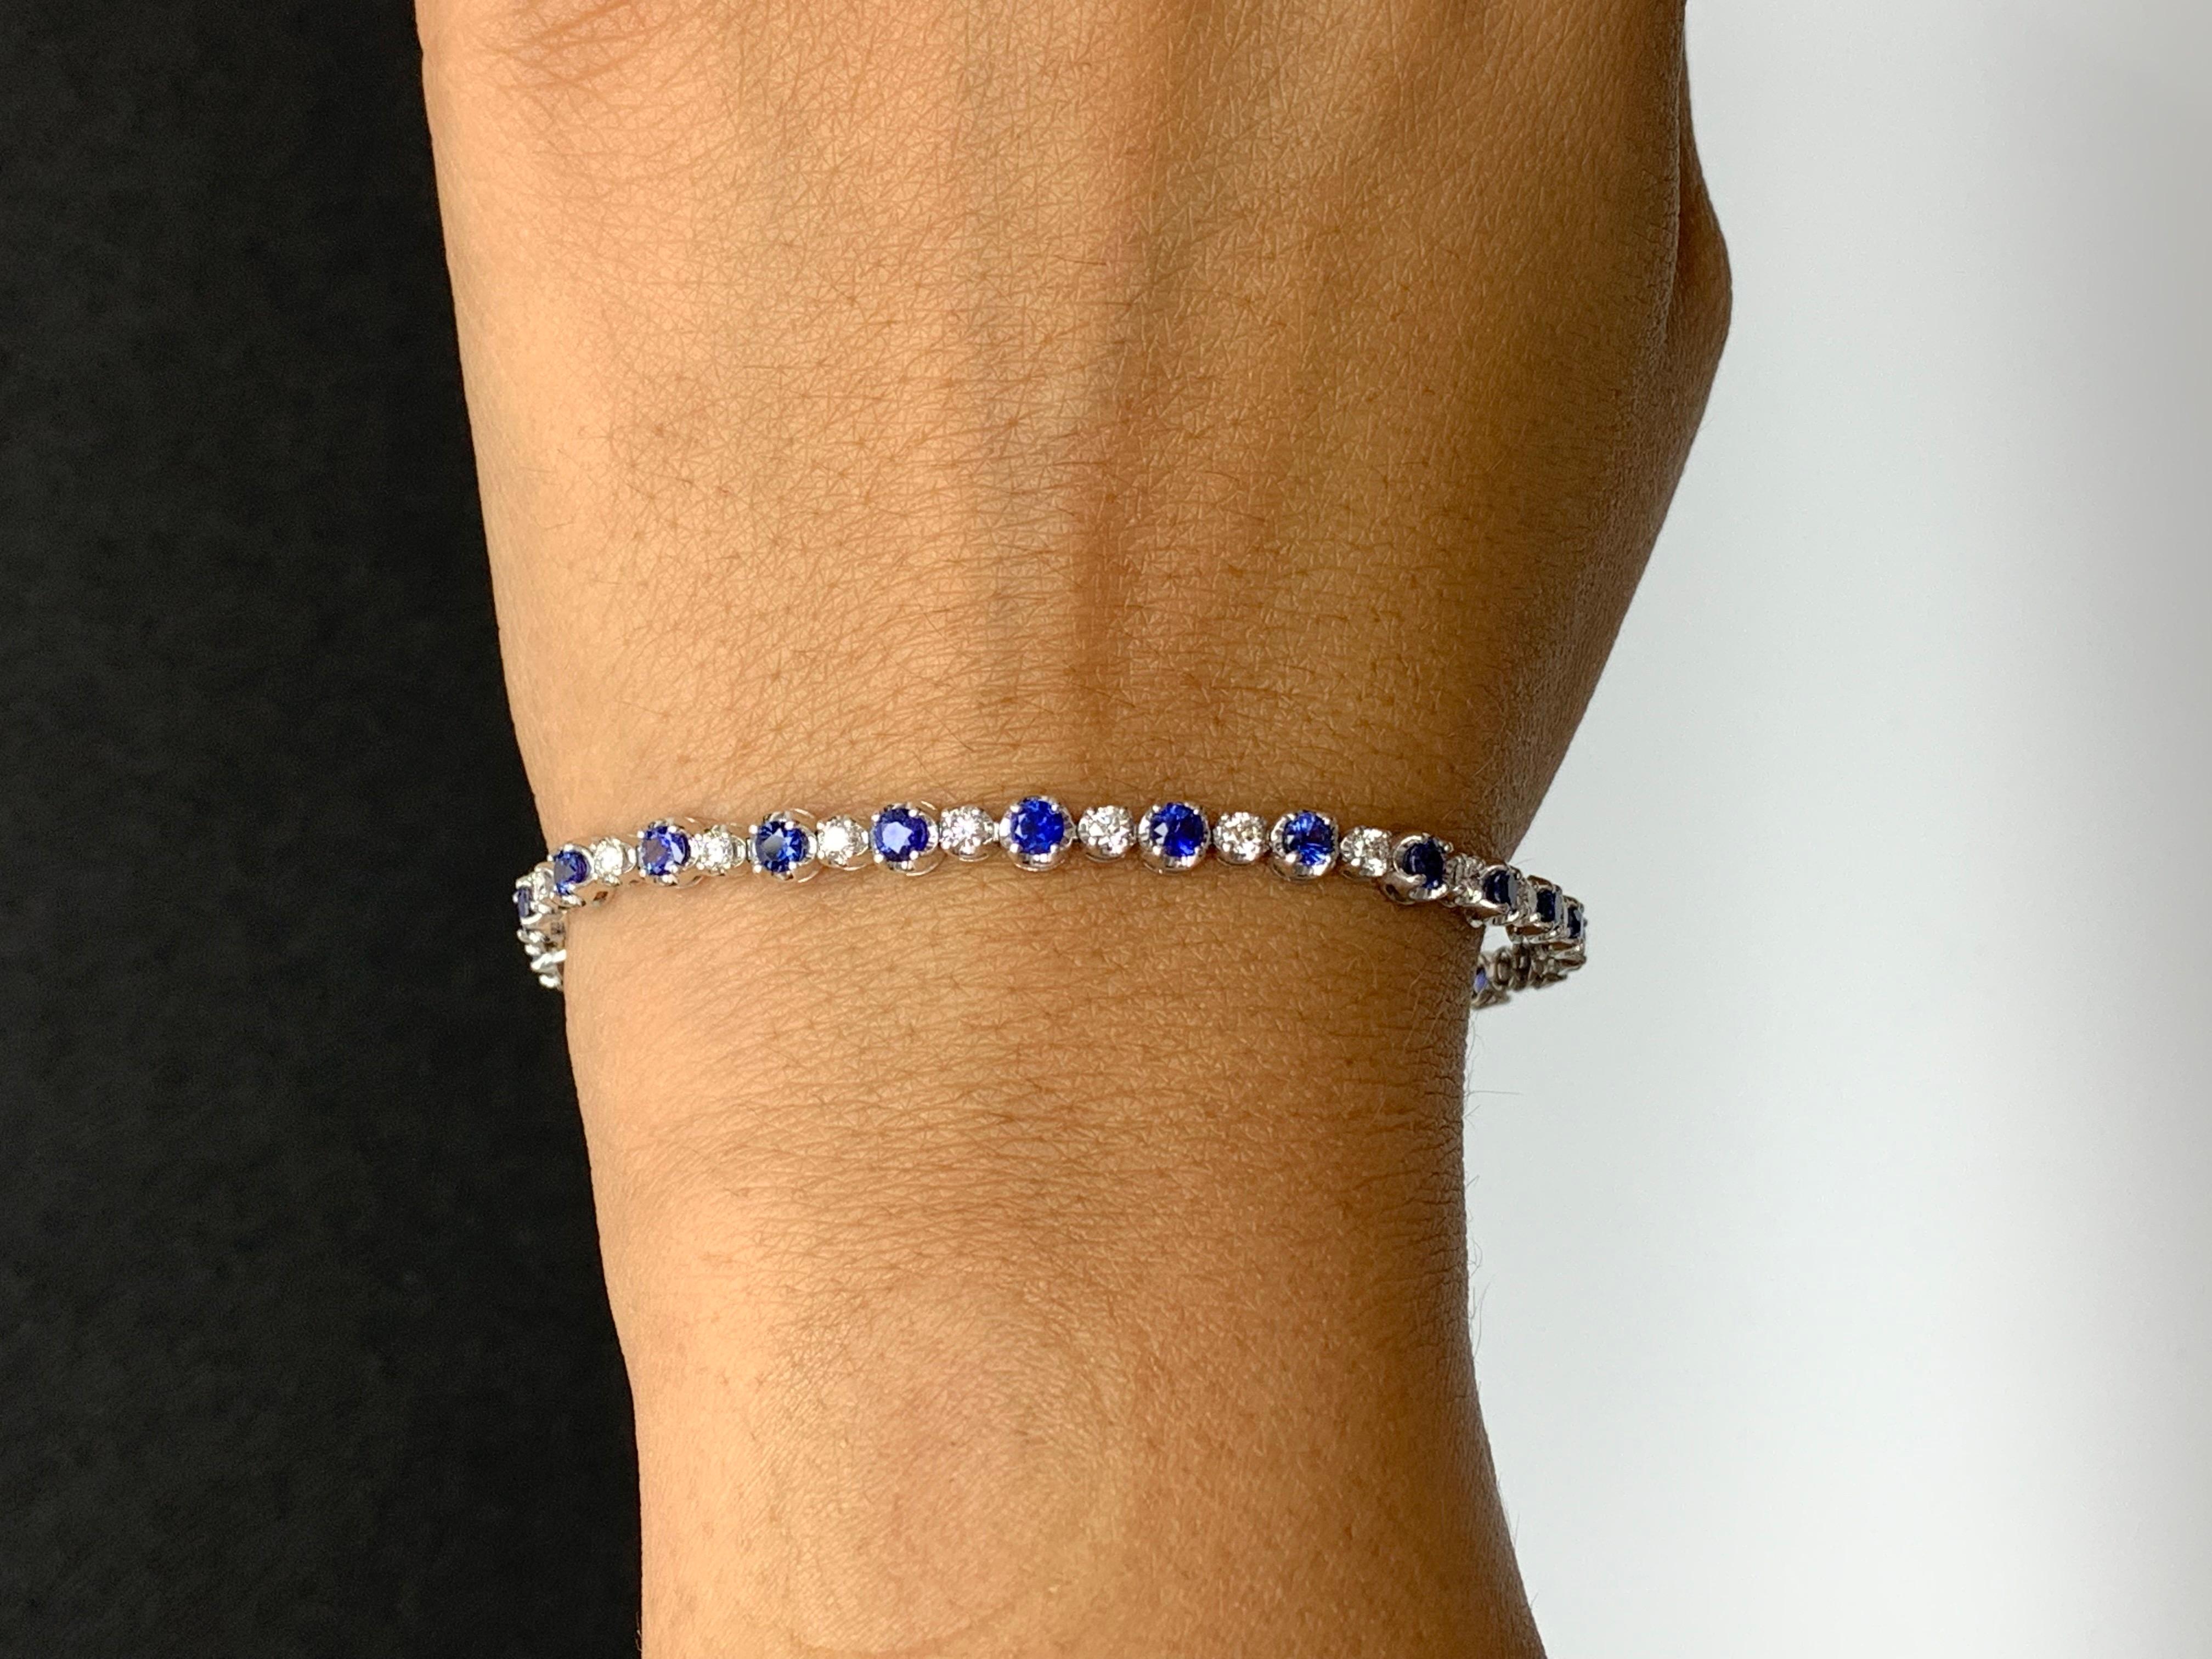 Women's 2.96 Carat Round Blue Sapphire and Diamond Bracelet in 14k White Gold For Sale